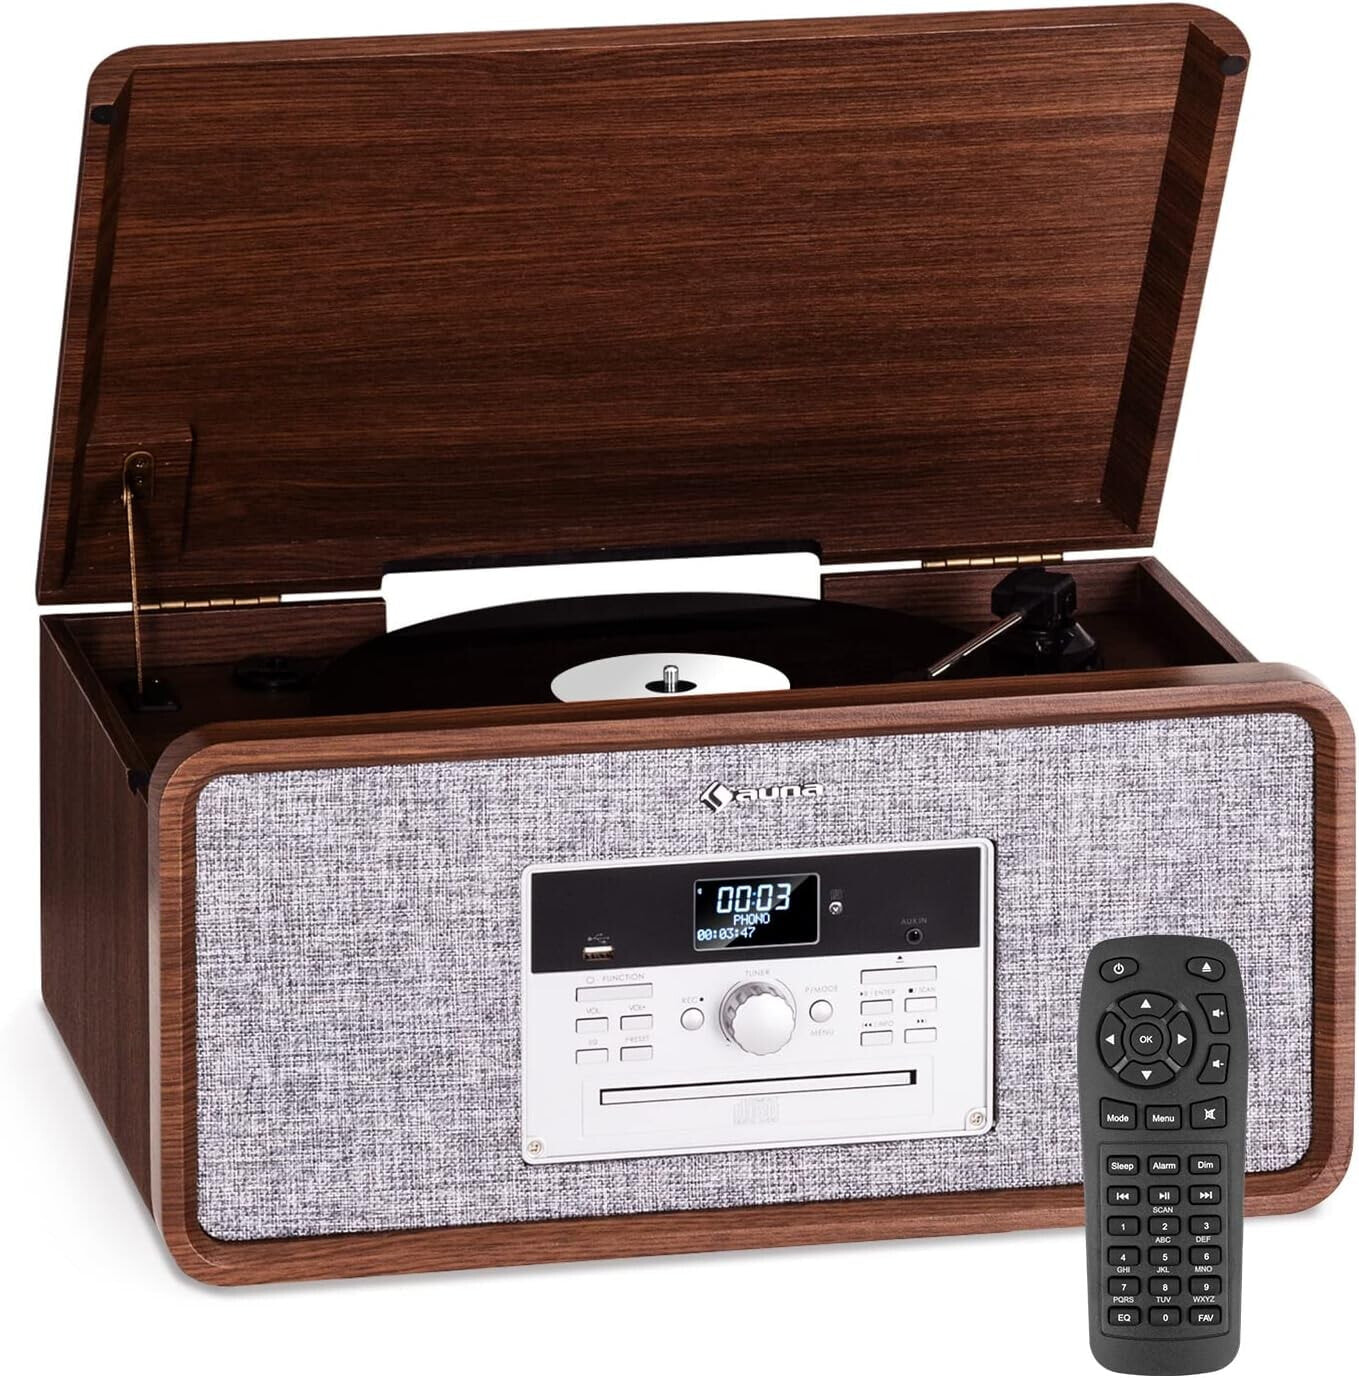 Auna Record Player for Record Players, Record Player with Speaker, CD Player, MP3 & USB Record Player with Bluetooth & DAB+/FM Radio, Audio Record Player, Turntable